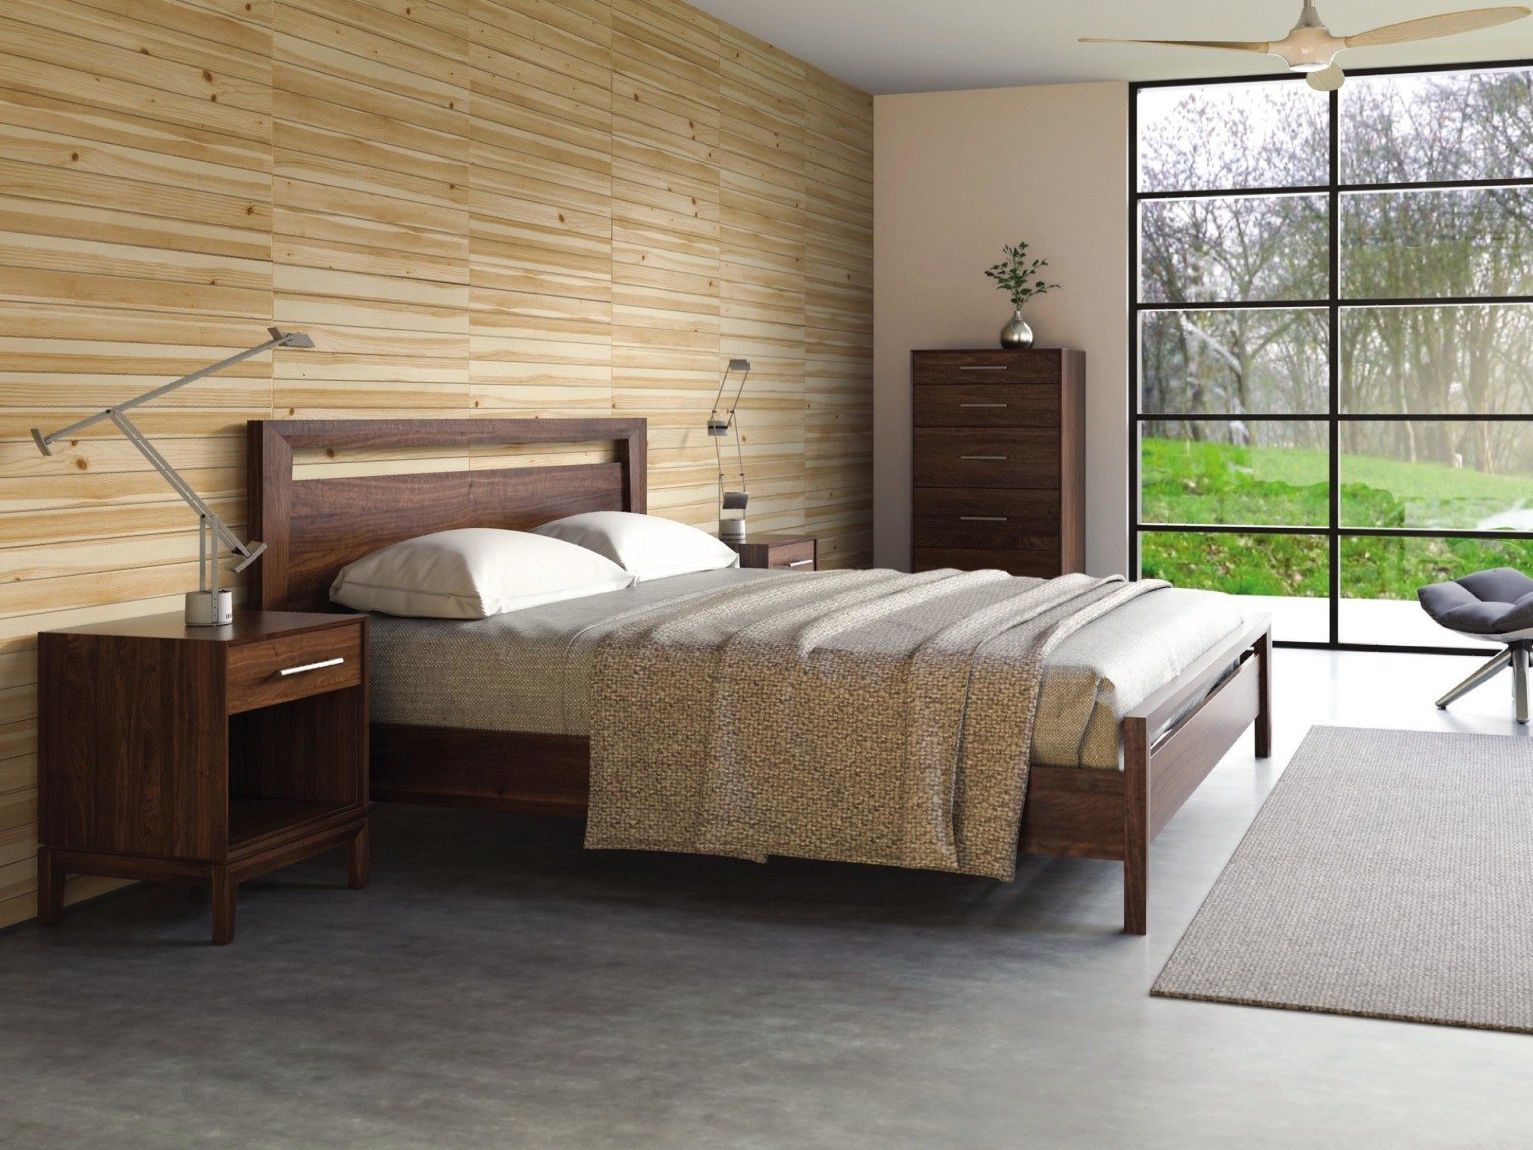 Copeland Mansfield Bedroom Collection from Viking Trader